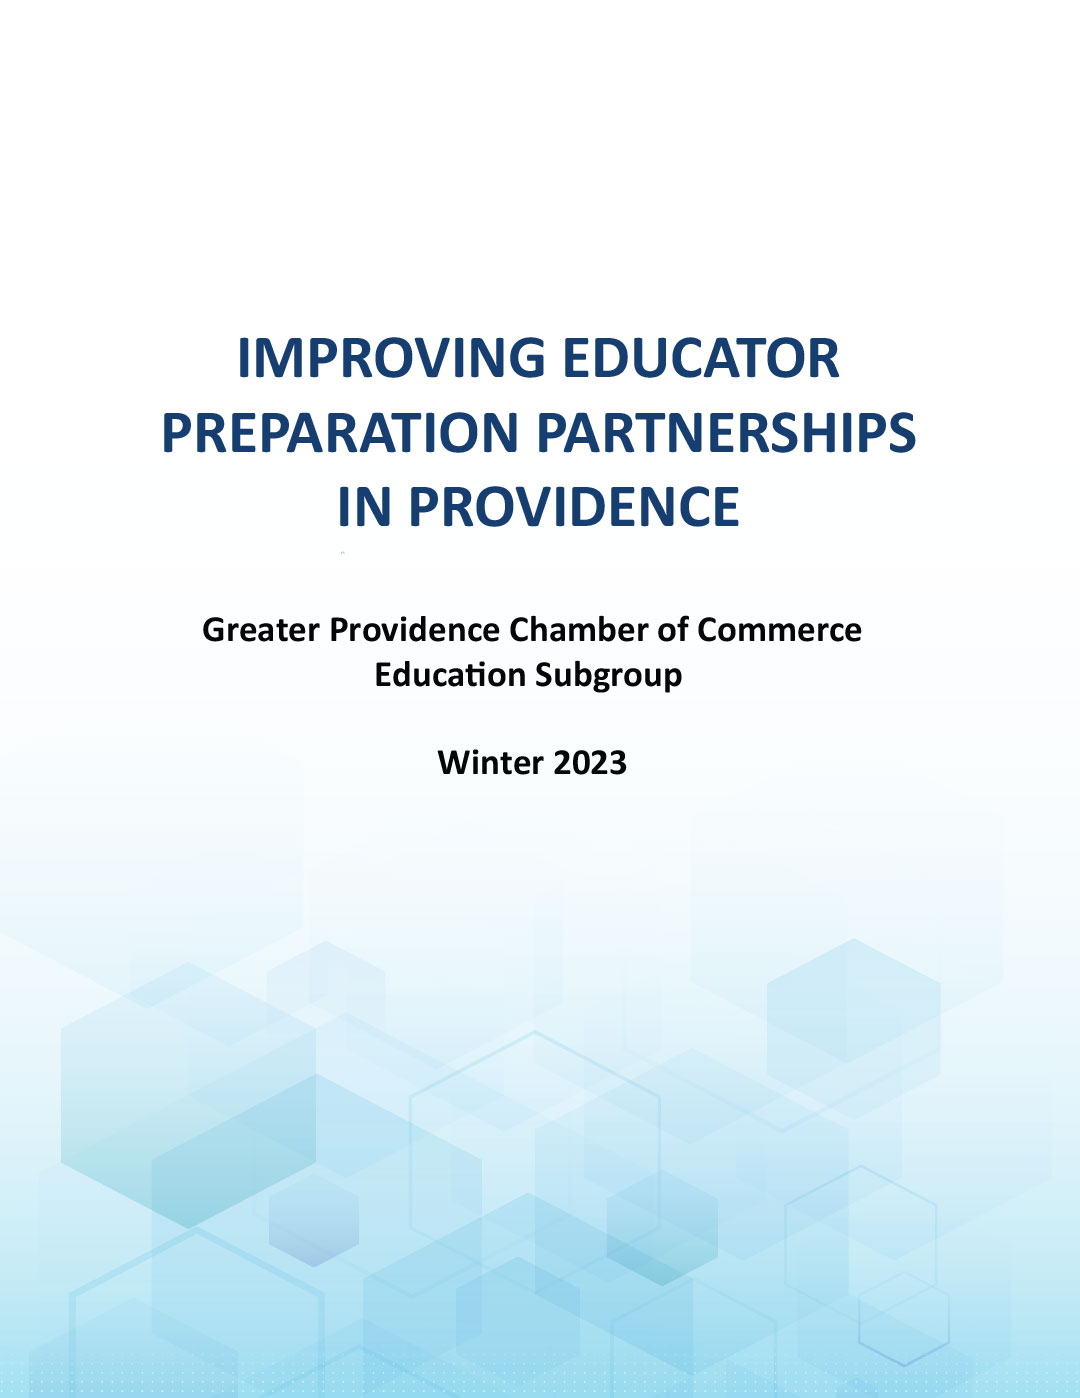 Partnerships between PPSD and RI Education Preparation Providers (EPPs)